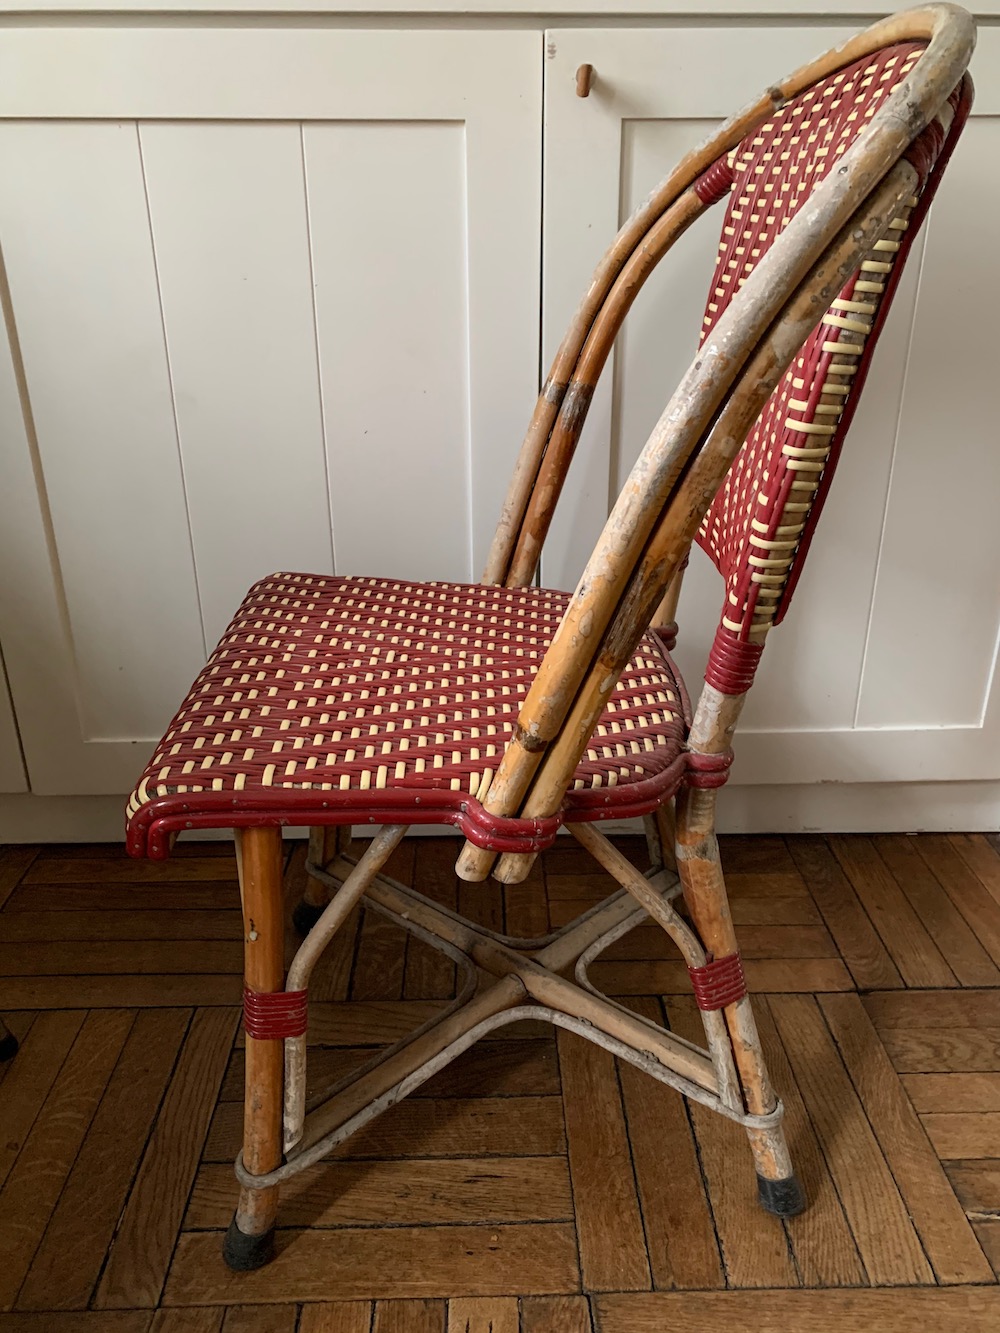 Maison Gatti, vintage chair, chaise vintage, chaise bistrot, chaise bistrot paris, bistrot chair, garden chair, outdoor chair, French chair, chaise jardin, chaise terrasse, mobilier vintage, vintage furniture , mid modern, modernism, bamboo chair, bamboo, chaise bambou